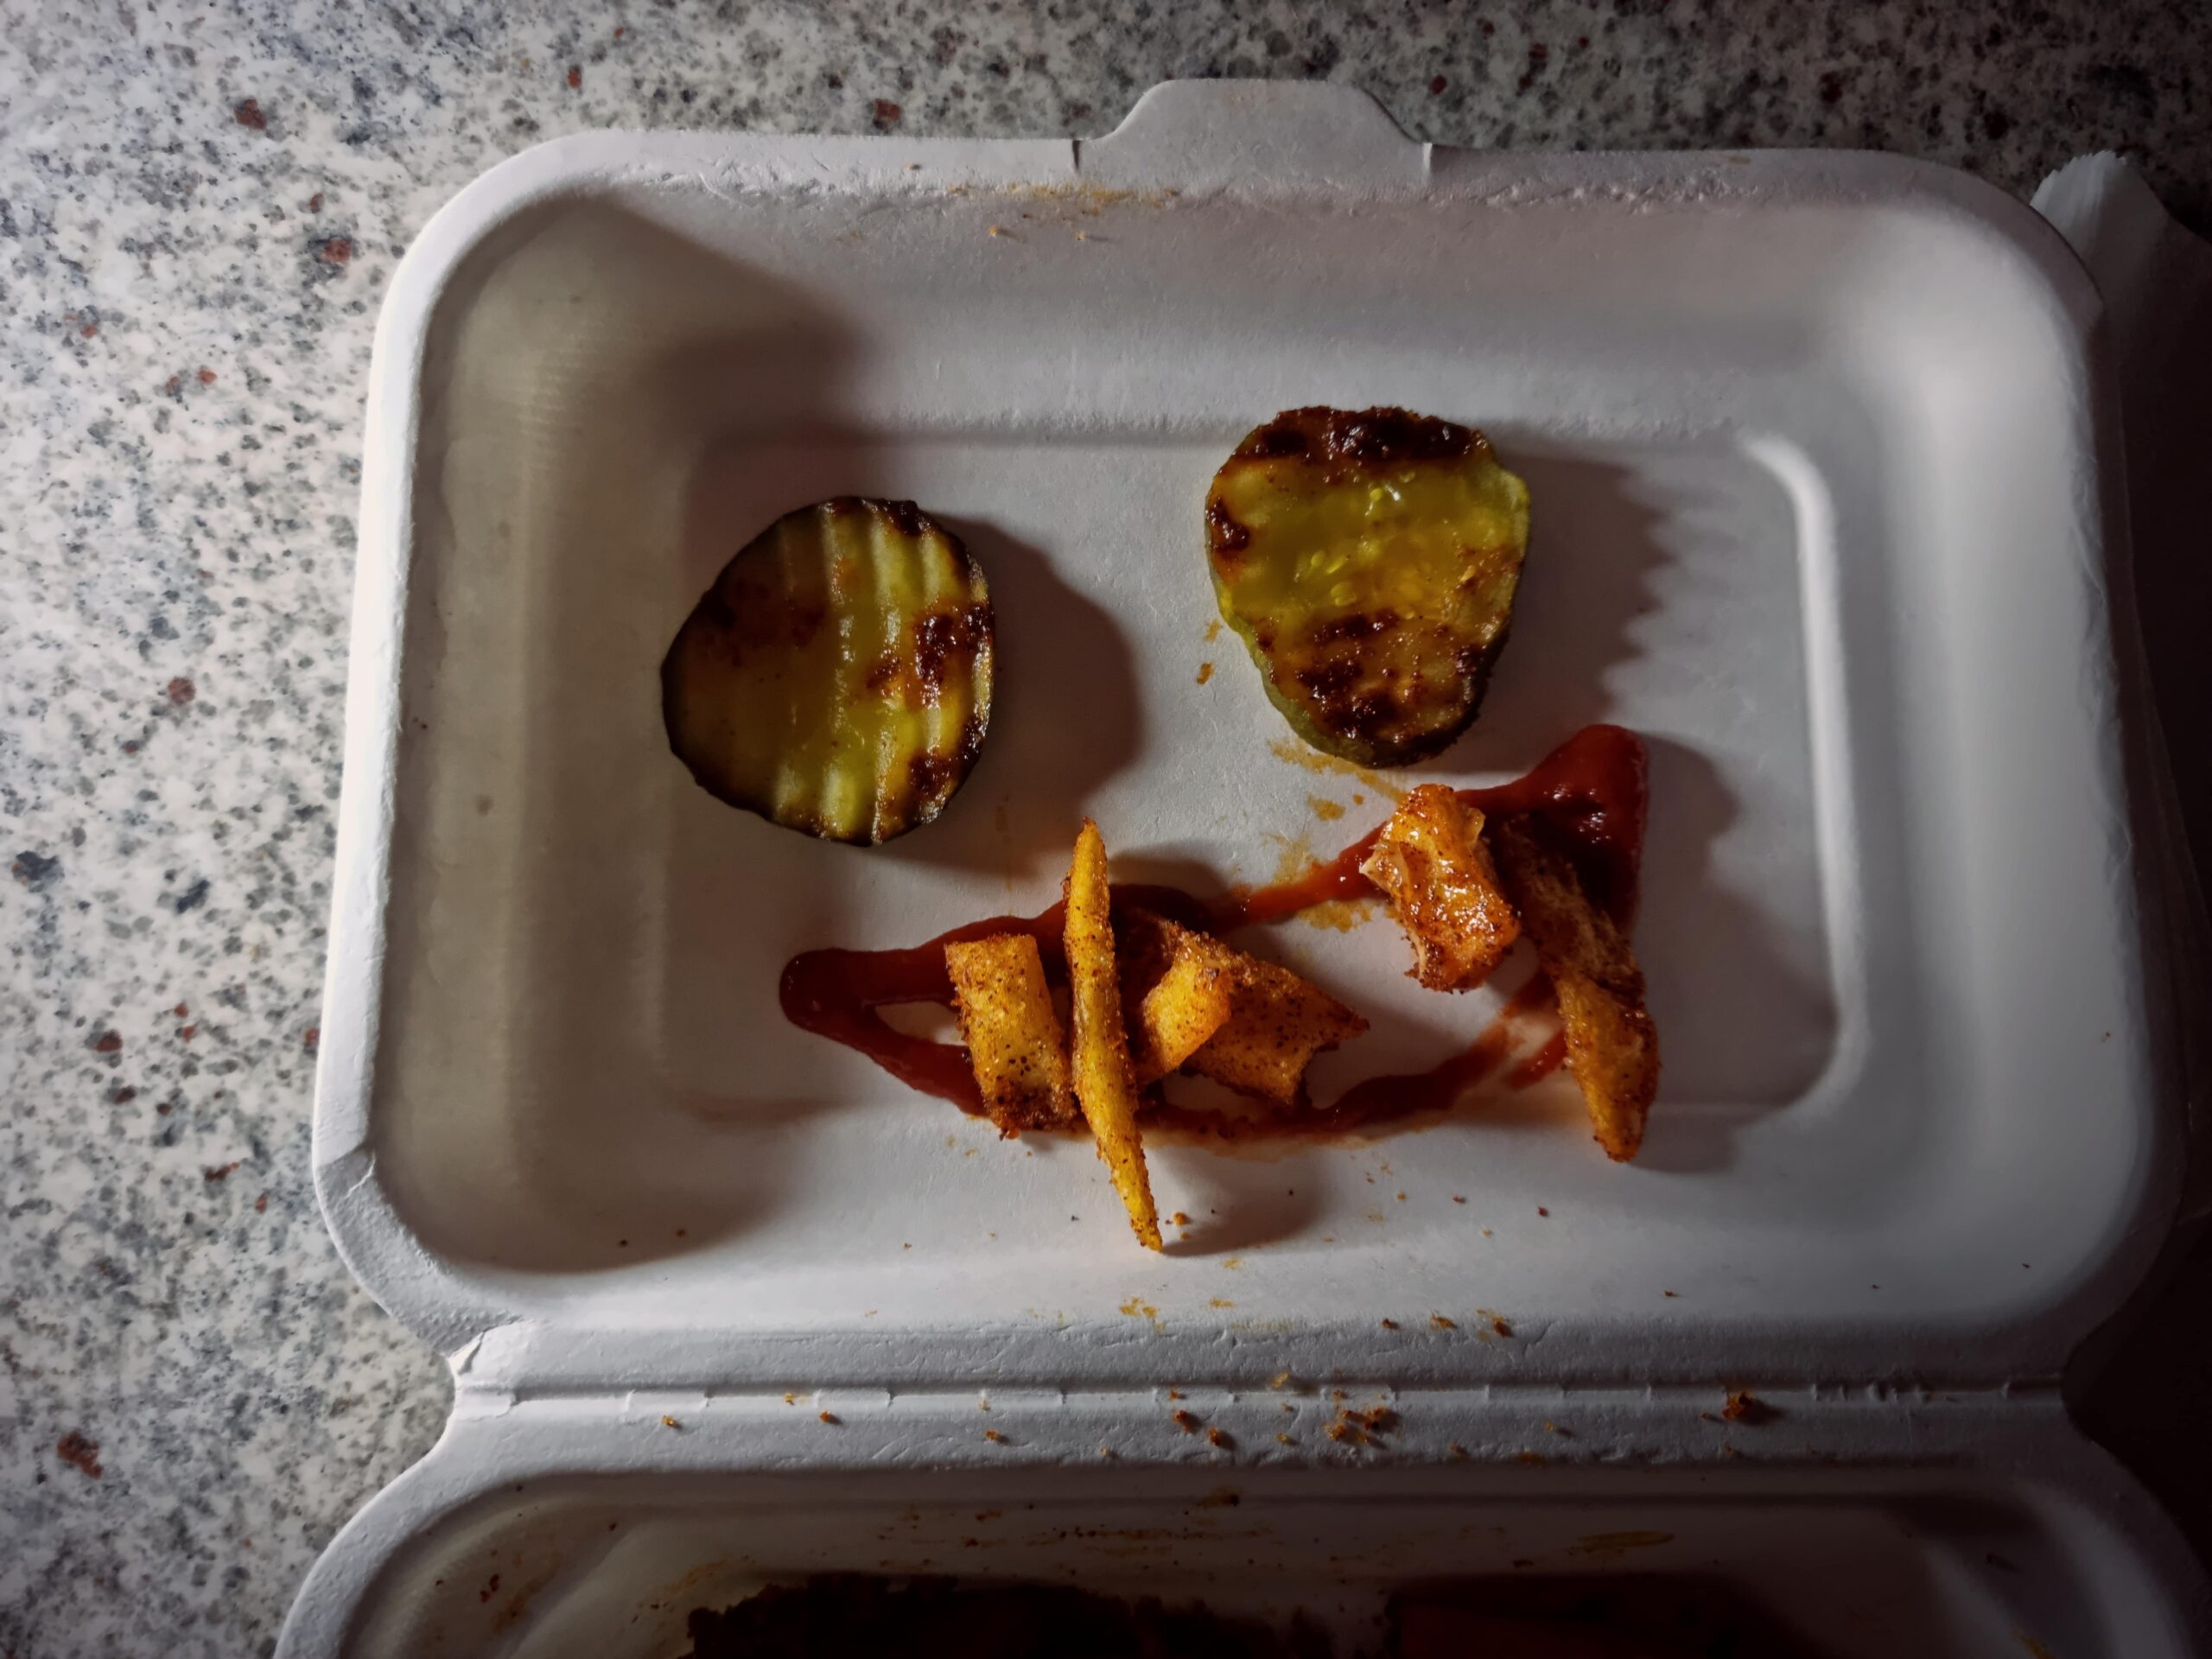 A smiley face made from pickles and fries lies in the top of a takeaway container.